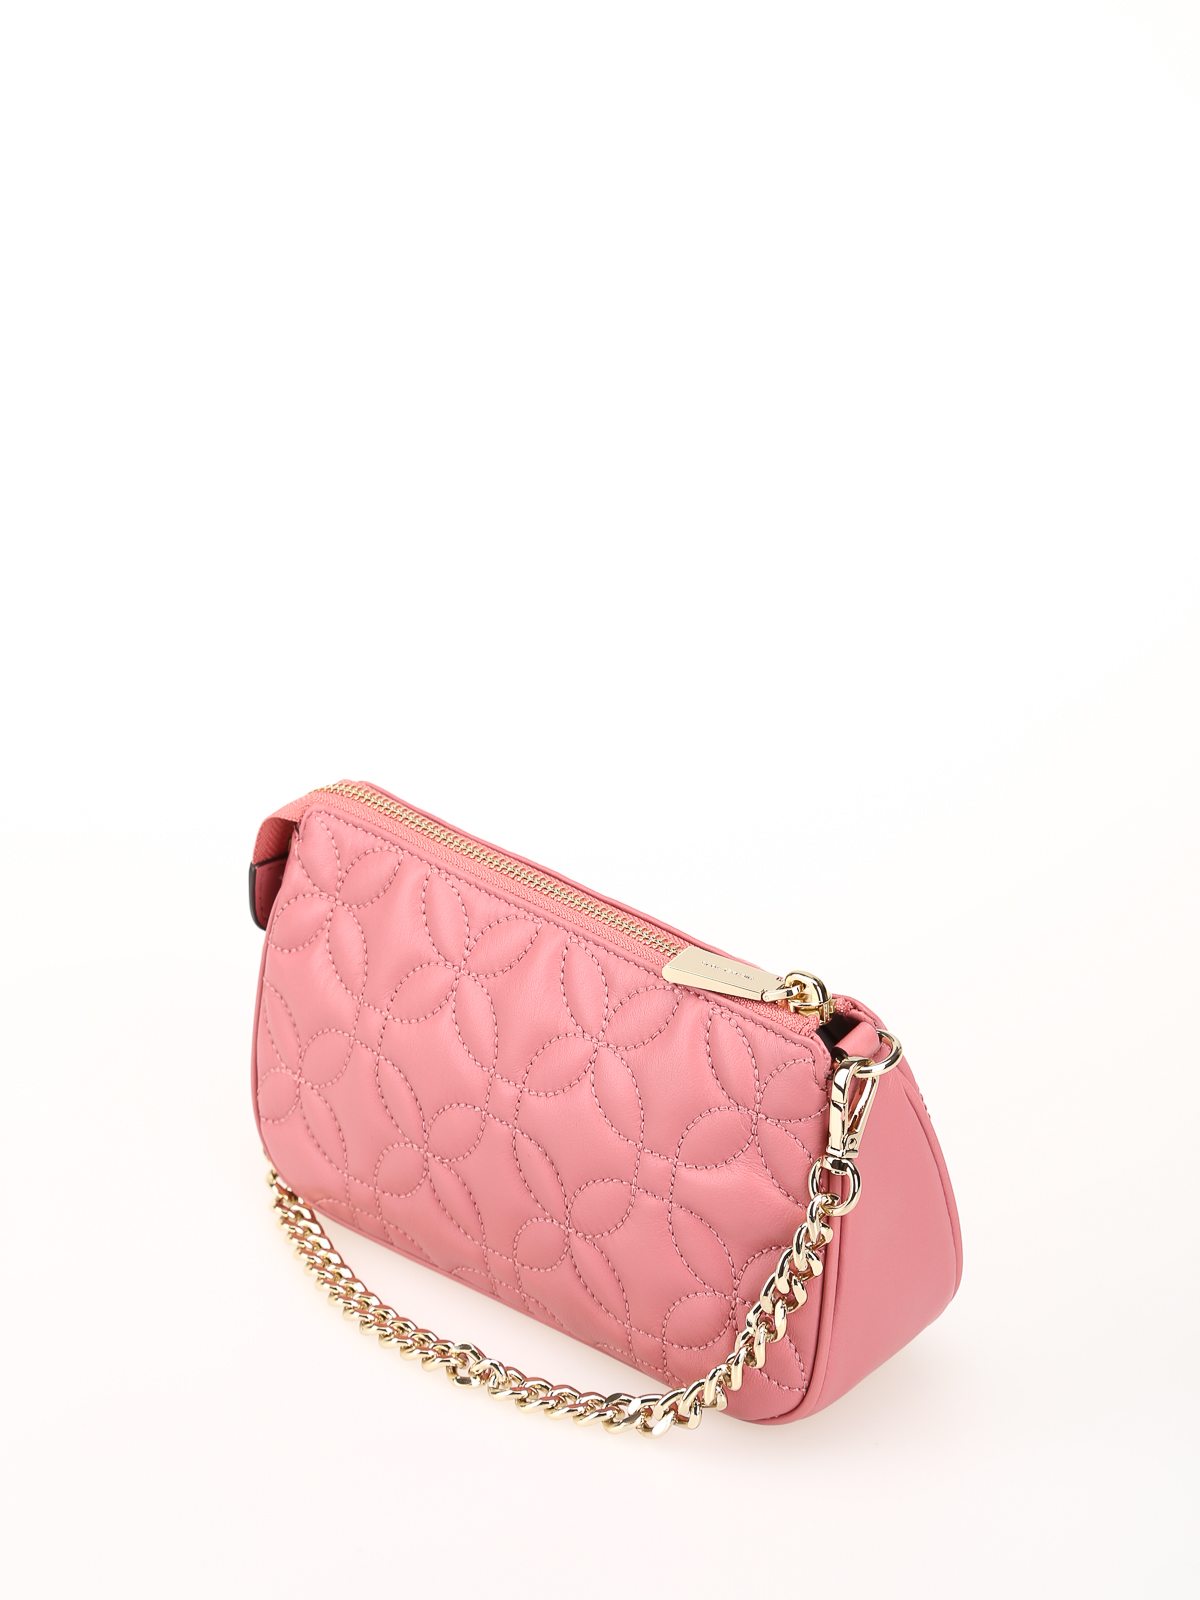 MD Chain pink quilted leather clutch 